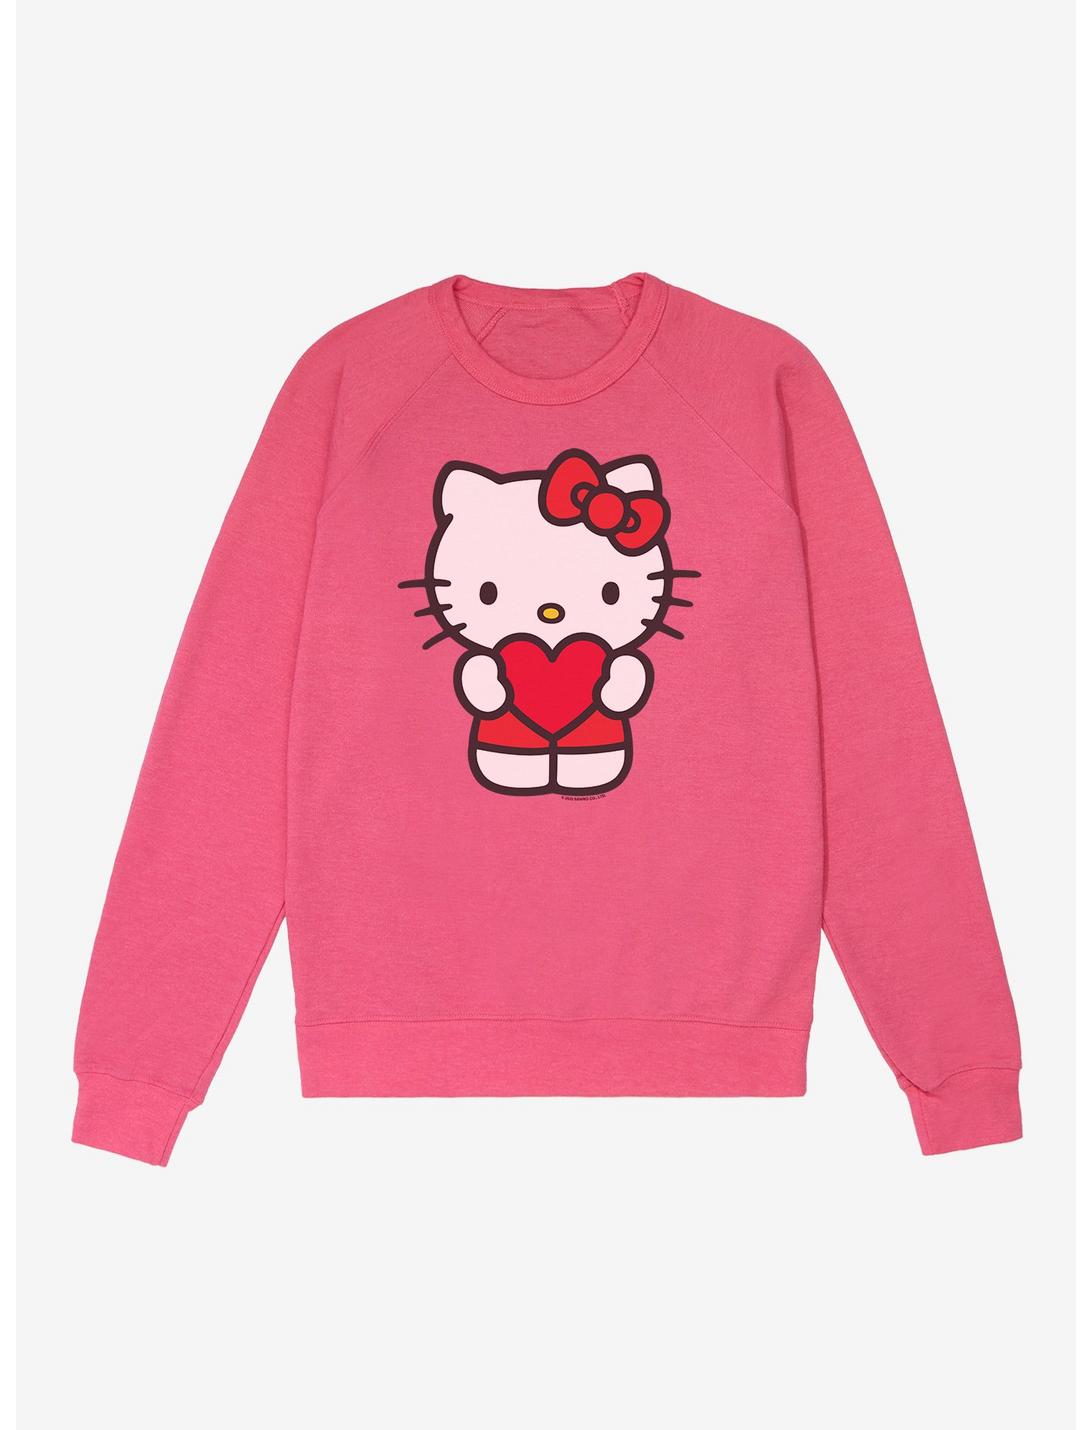 Hello Kitty  Holding A Heart French Terry Sweatshirt, HELICONIA HEATHER, hi-res